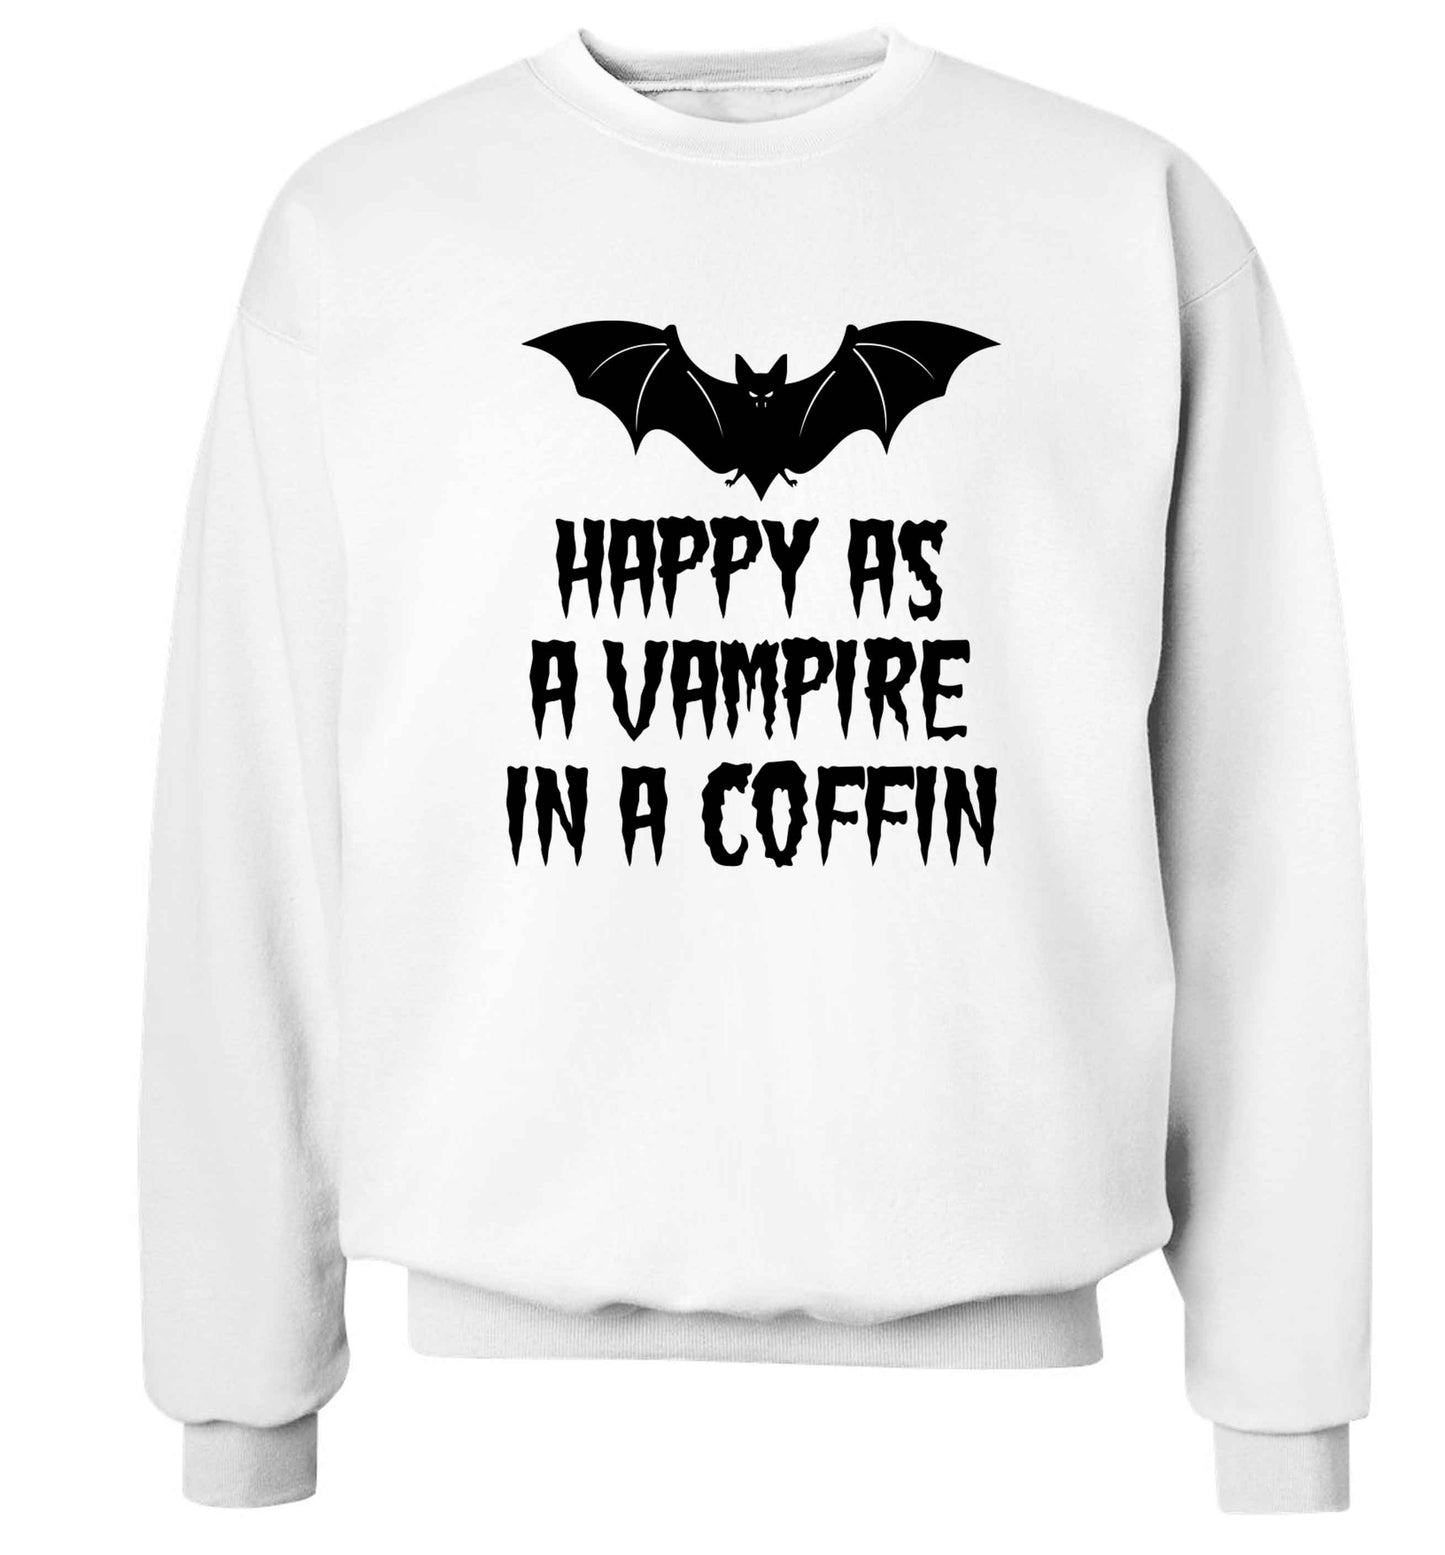 Happy as a vampire in a coffin Adult's unisex white Sweater 2XL